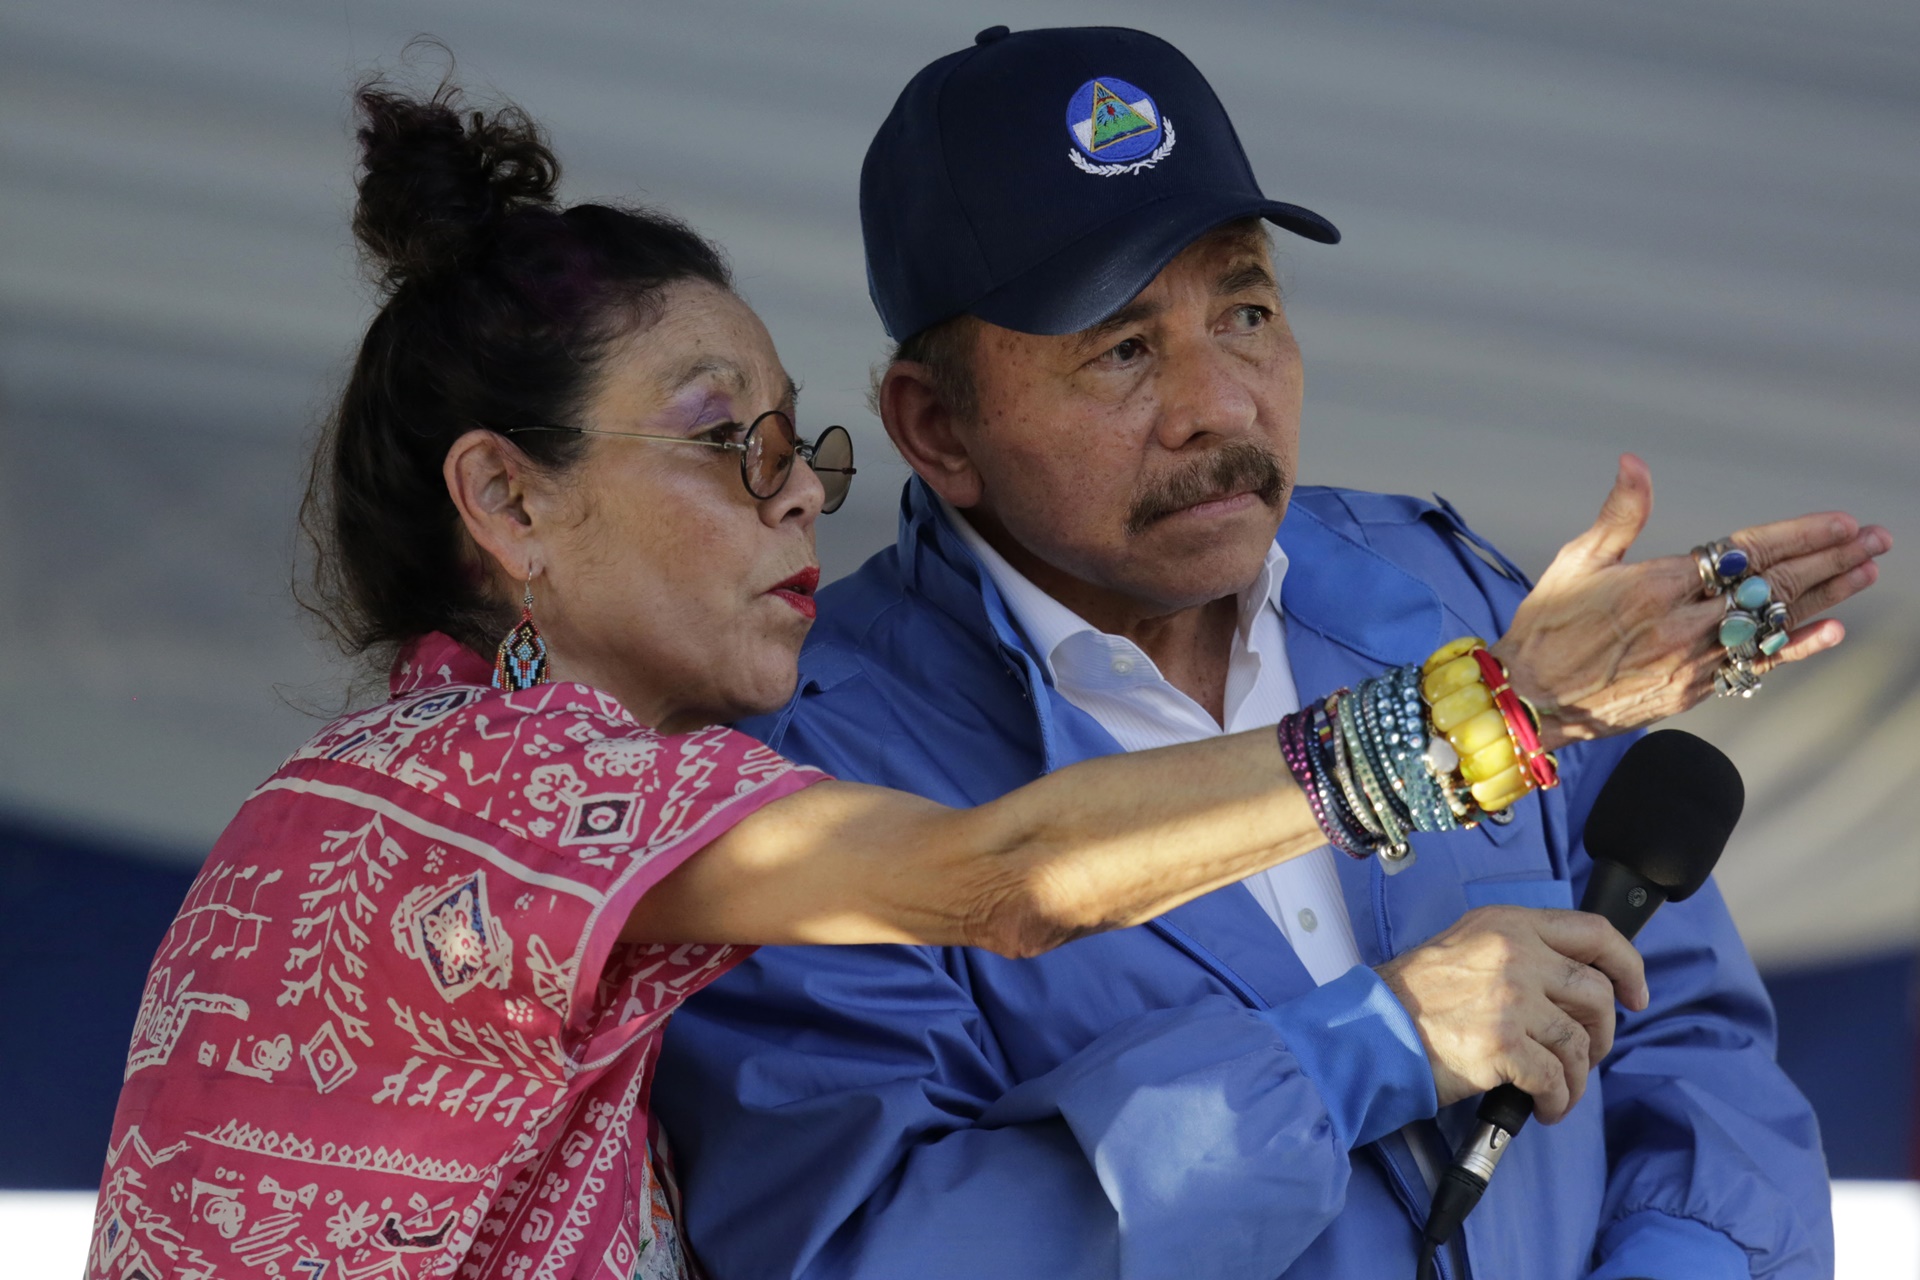 the-united-states-banned-the-entry-of-a-hundred-nicaraguan-officials-for-supporting-daniel-ortega's-regime